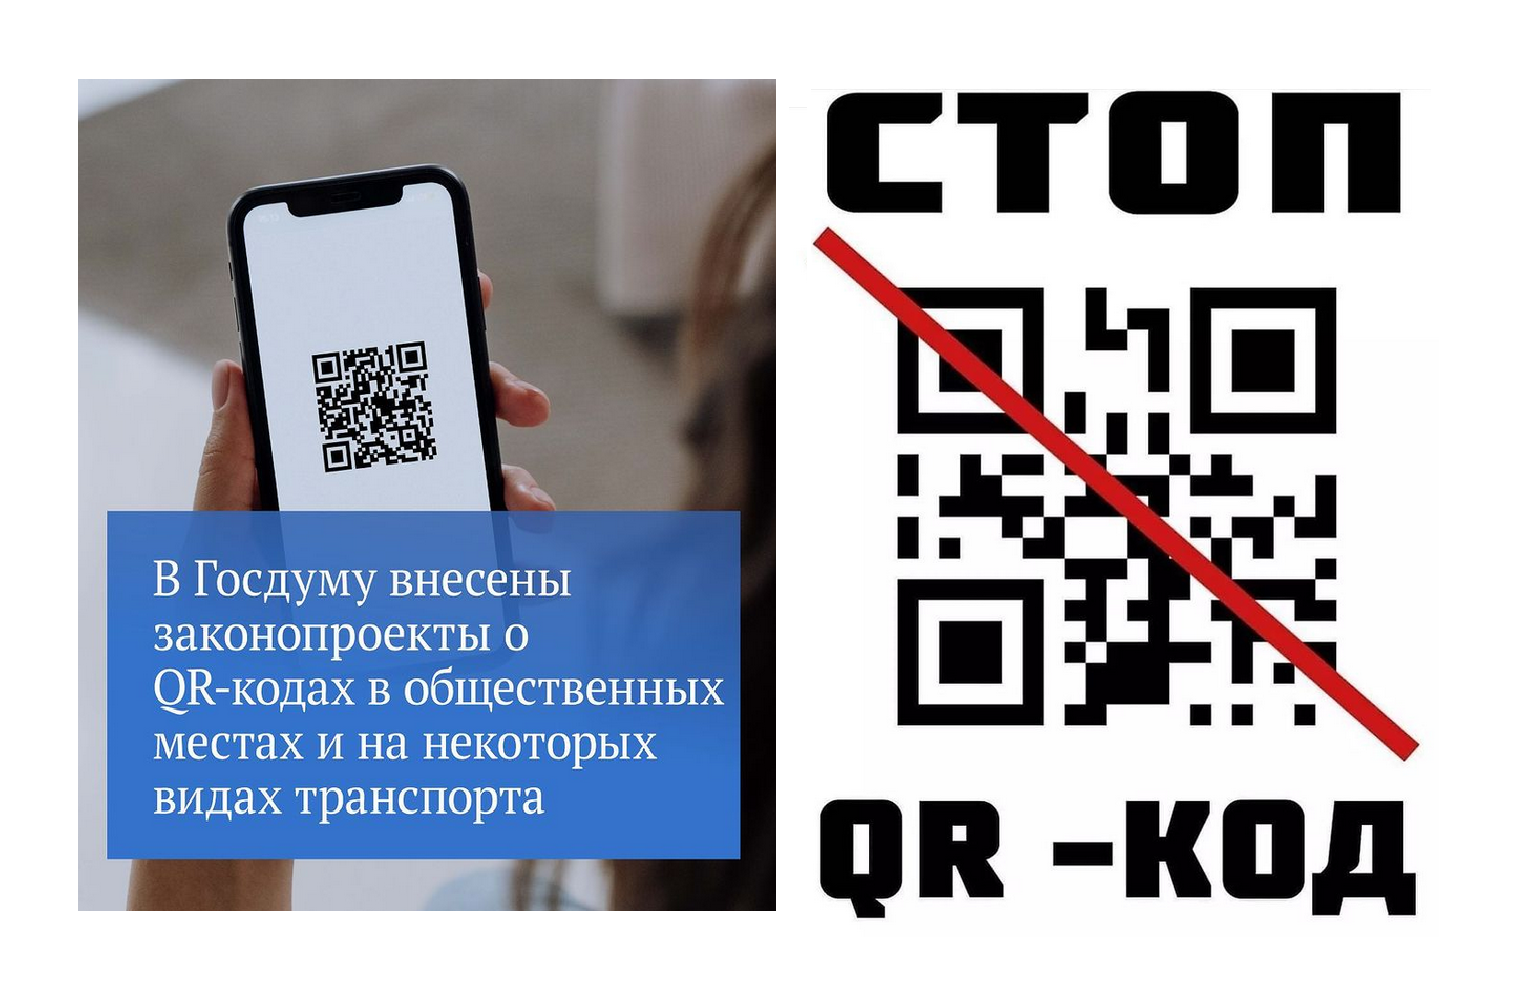 "People are not goods!" Russians are indignant on Instagram of the State Duma, demanding the abolition of QR-codes